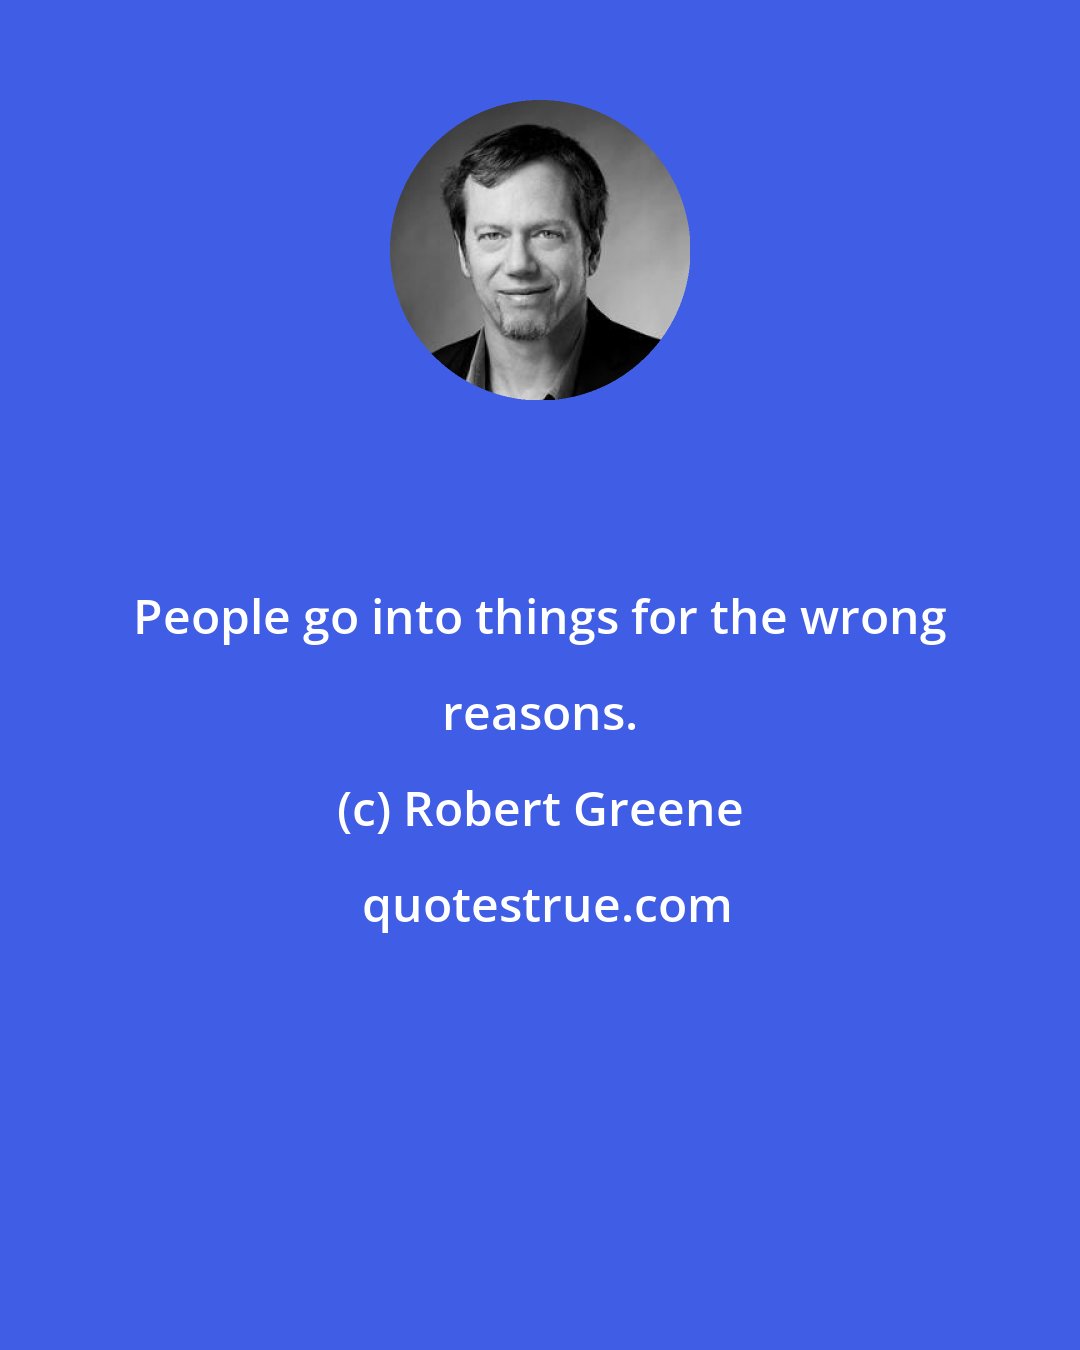 Robert Greene: People go into things for the wrong reasons.